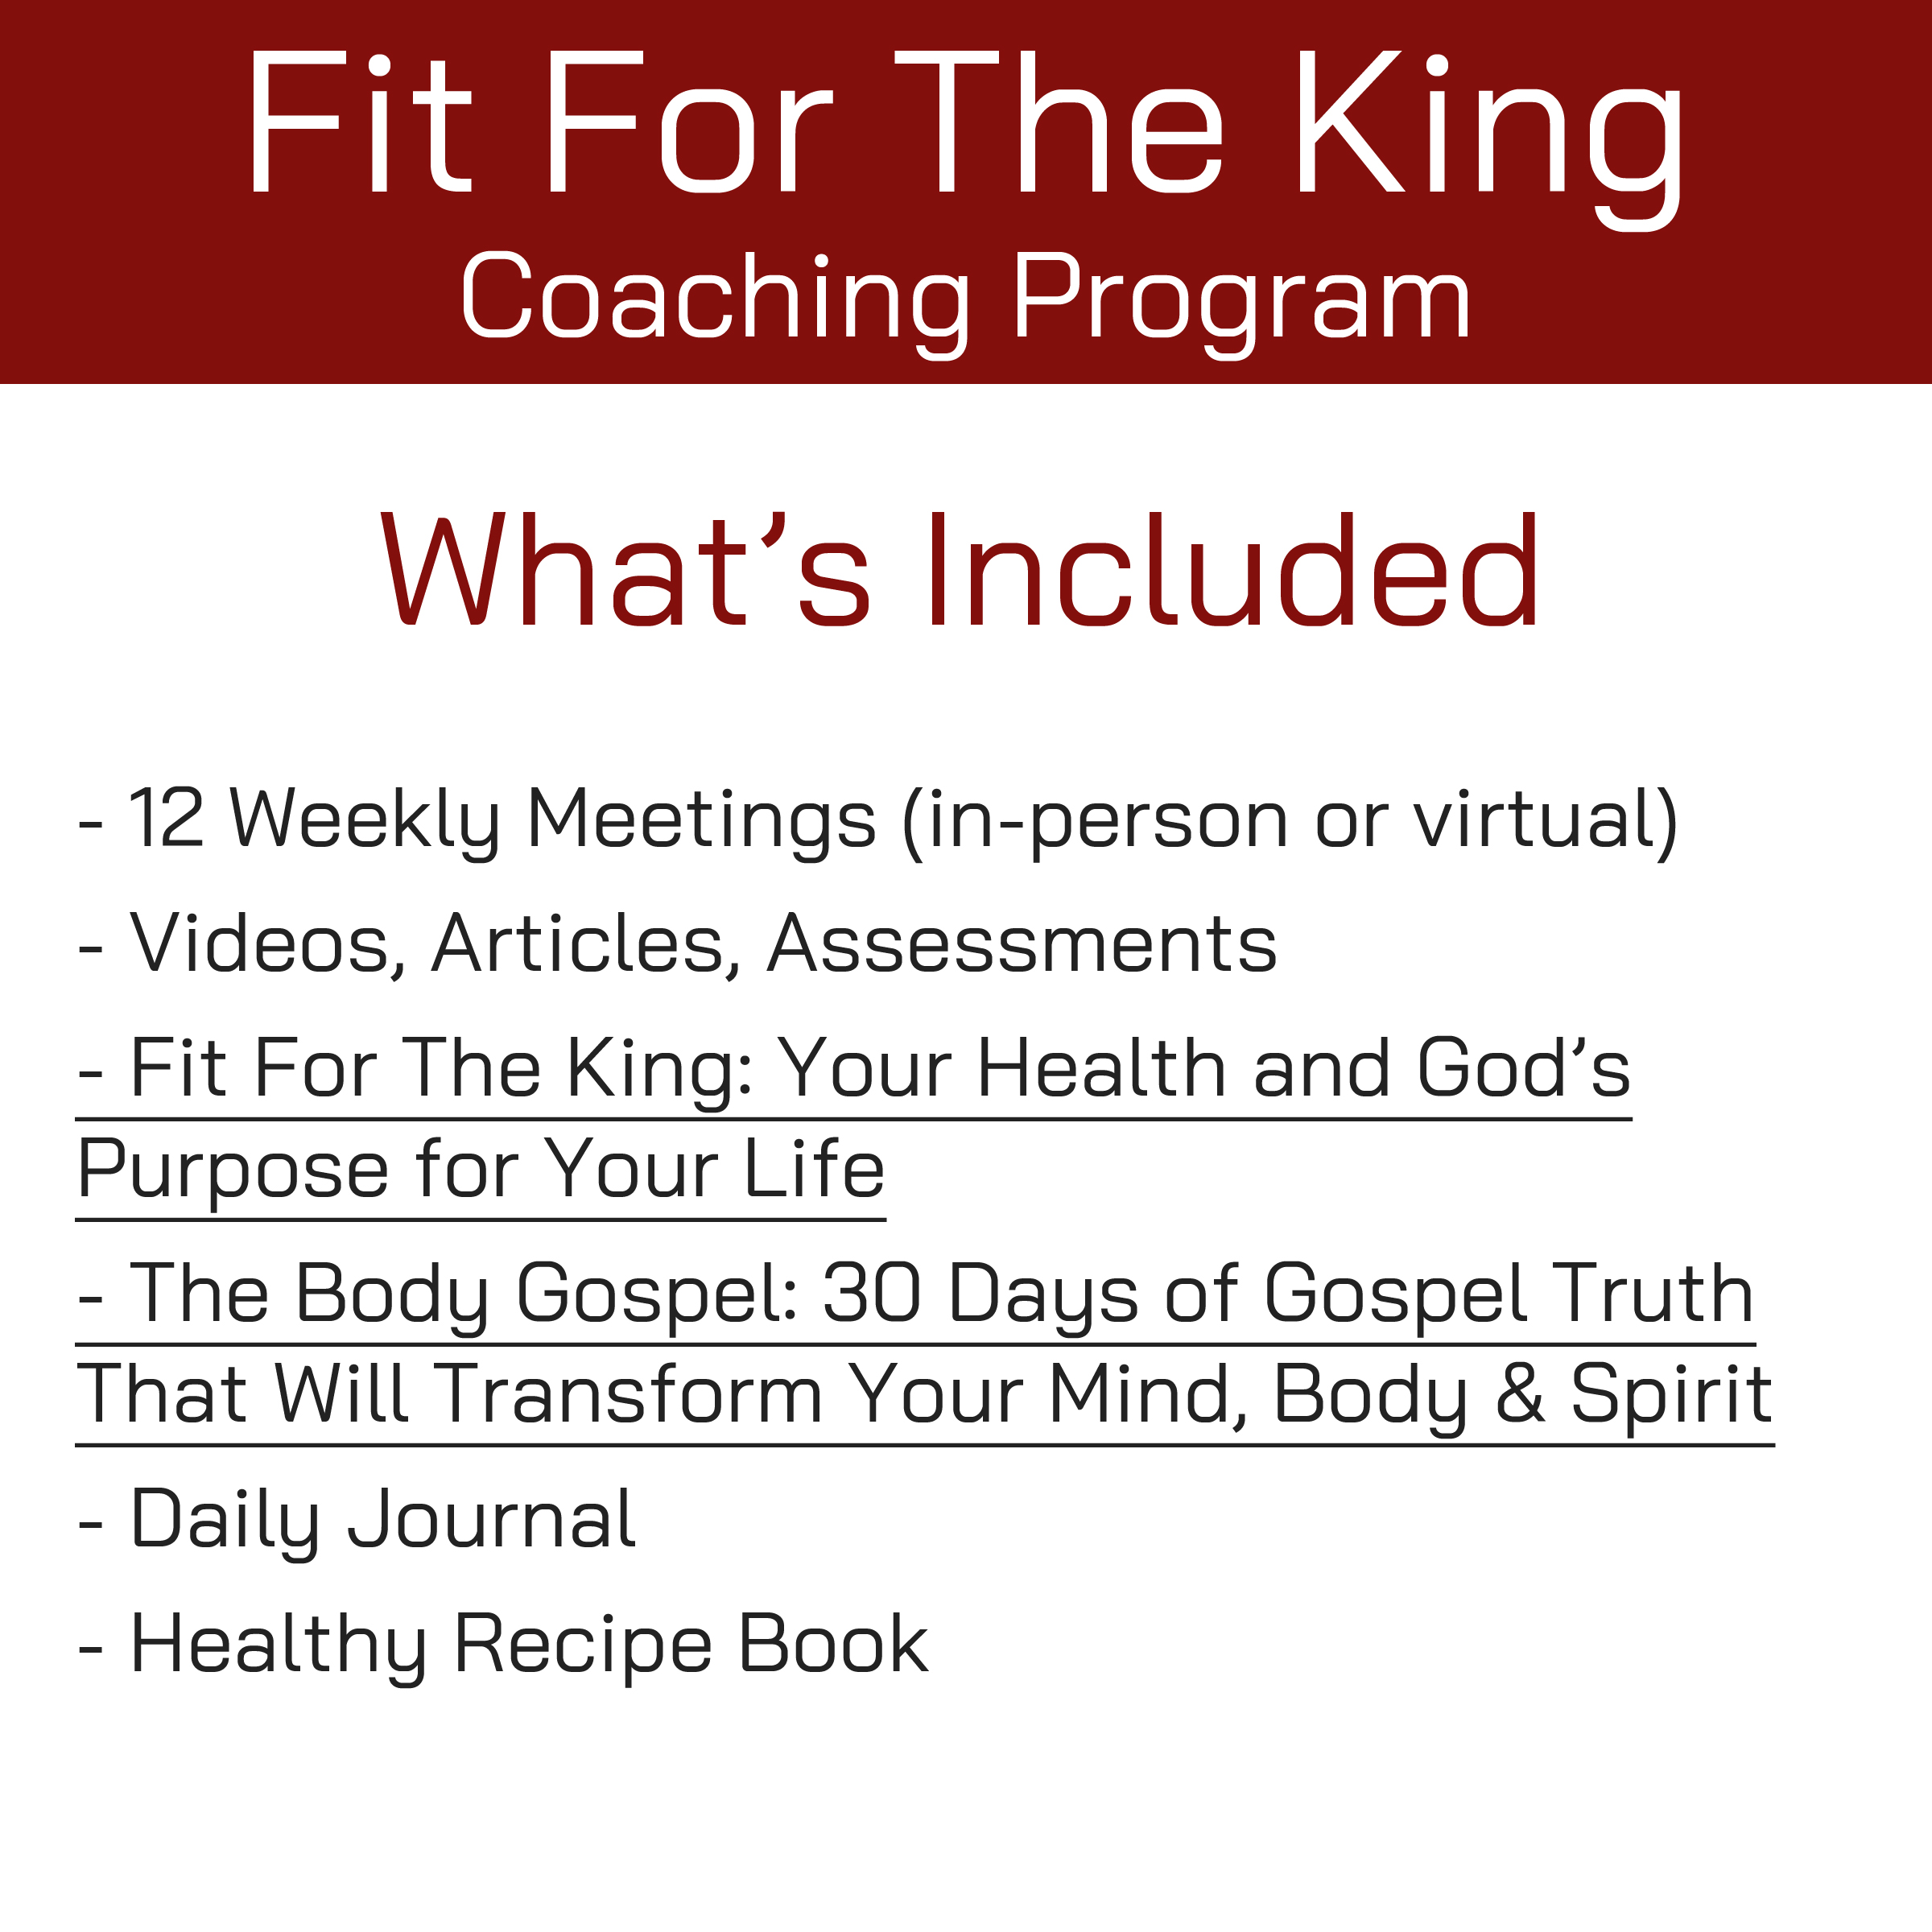 FFTK Coaching Program - What's Included